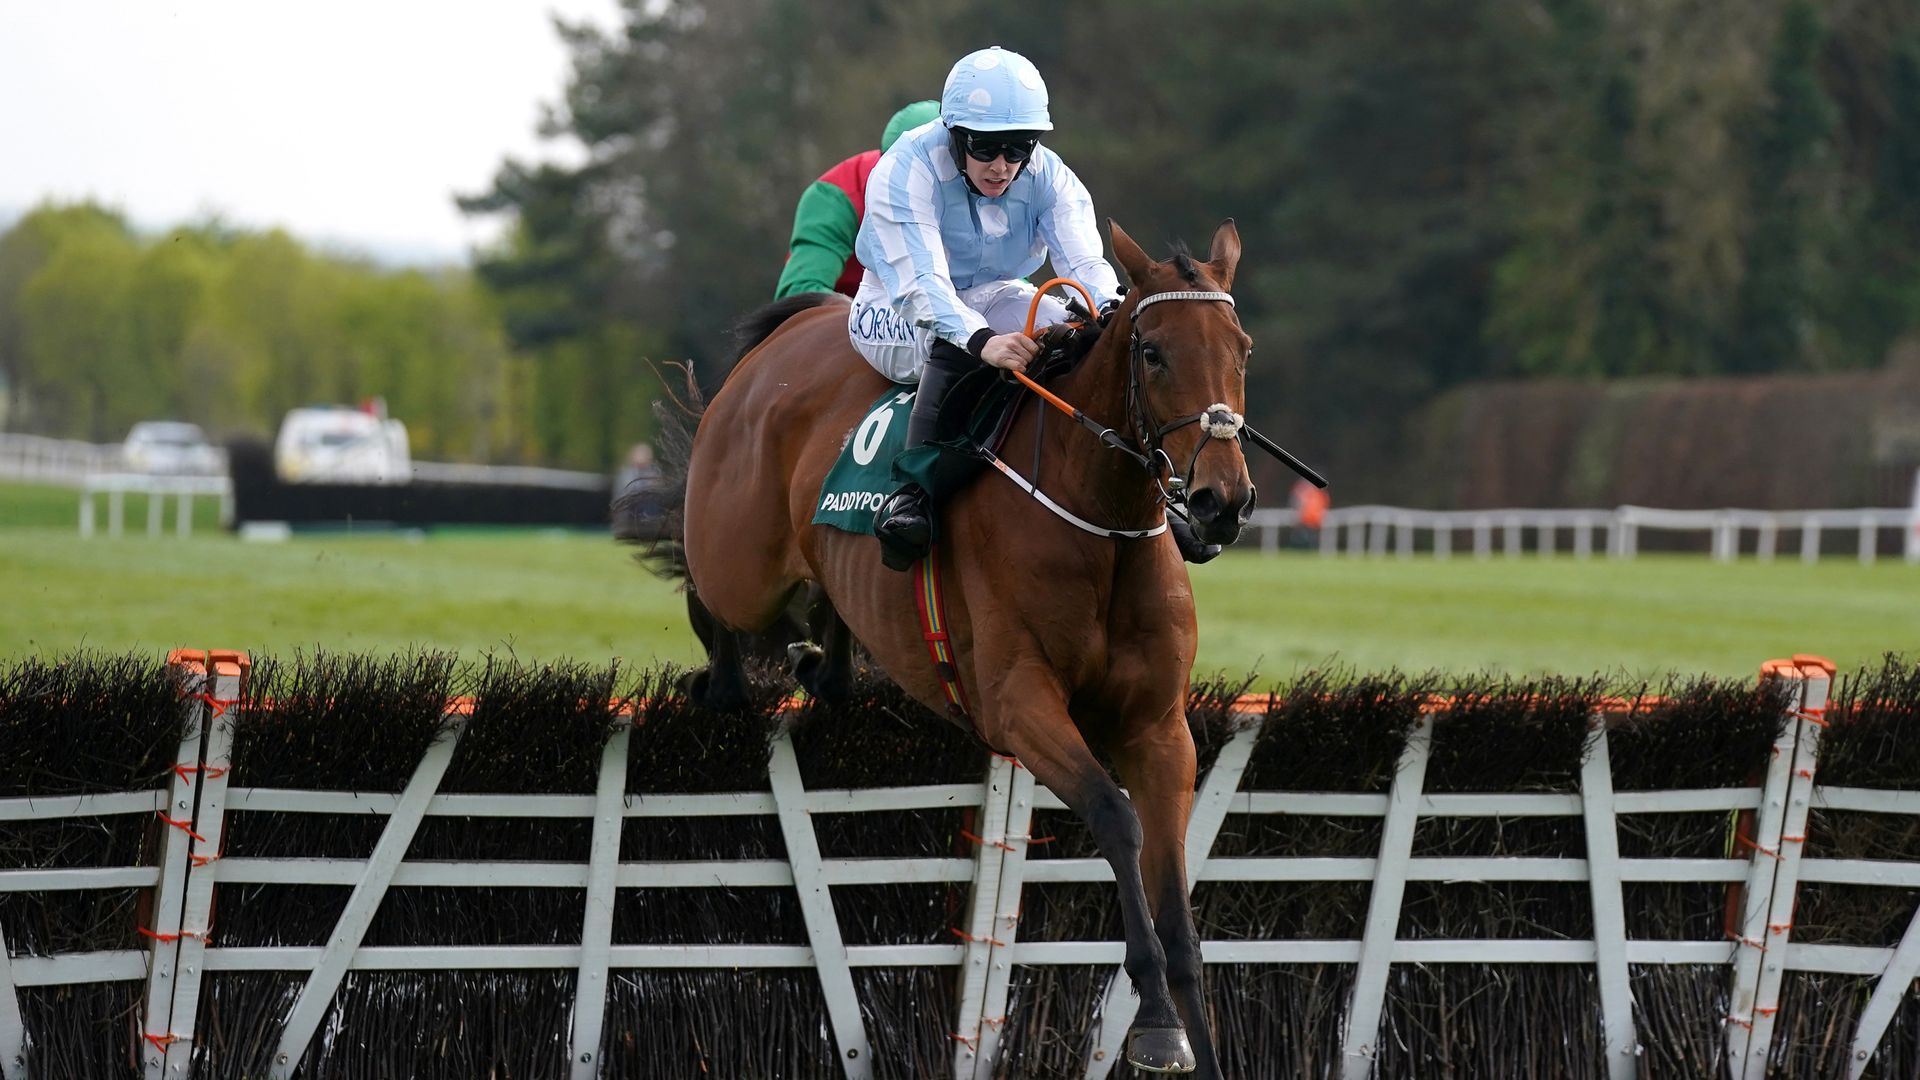 De Bromhead to look at Mares' Hurdle route for Honeysuckle